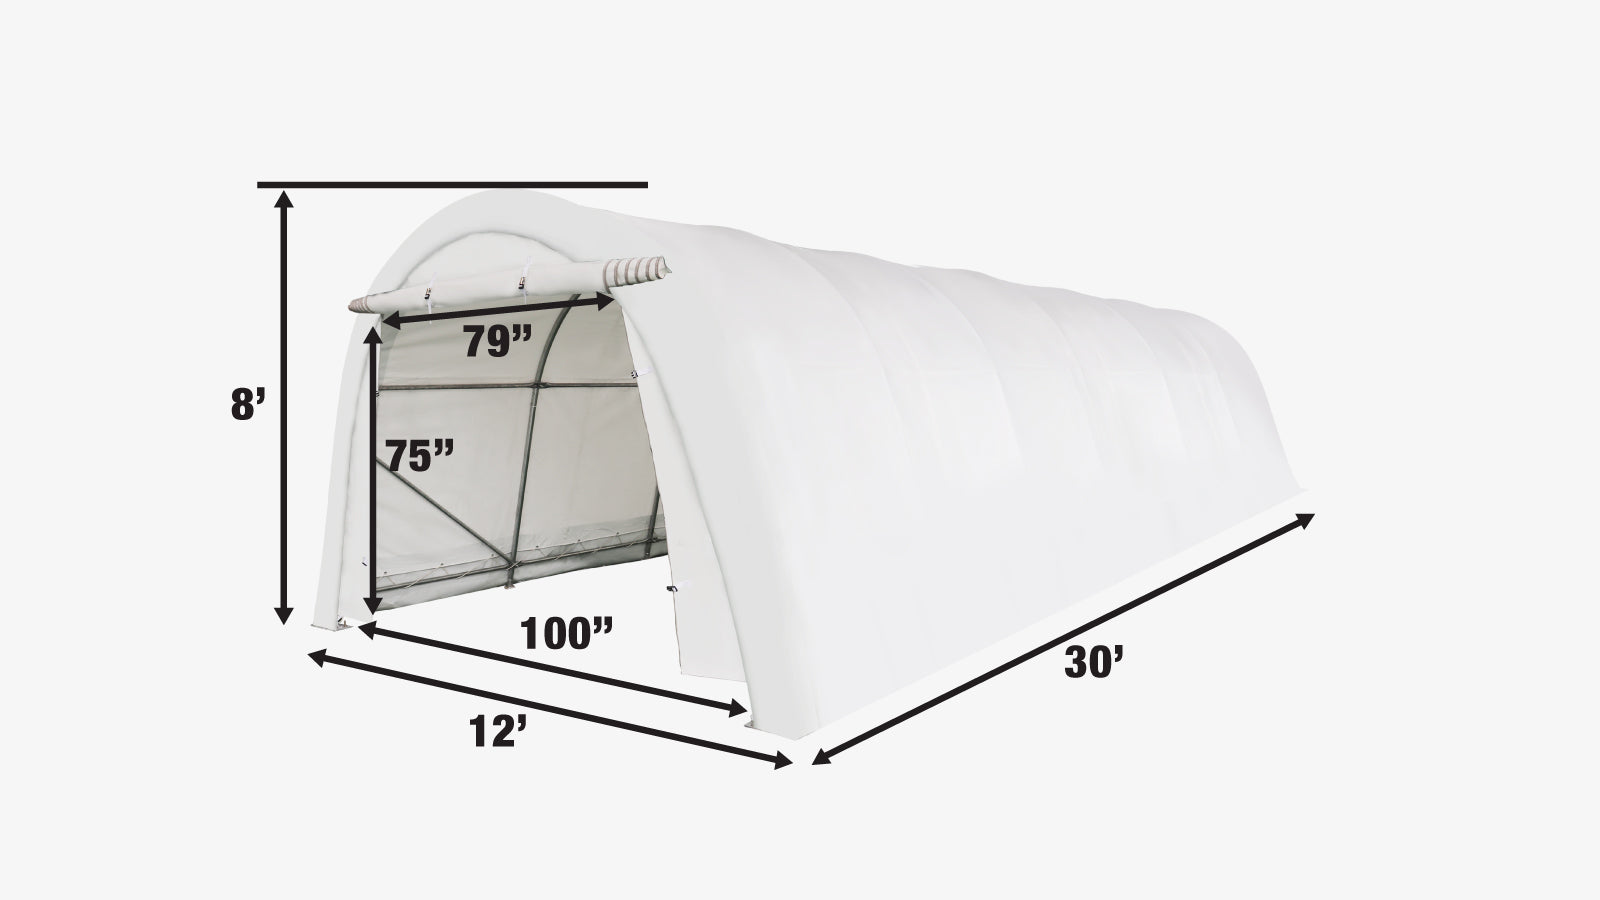 TMG Industrial 12’ x 30’ Car Shelter w/Rounded Roof & Heavy-Duty 11 OZ PE Fabric Cover, Galvanized Steel Frame, Roll-Up Doors, TMG-ST1230R-specifications-image